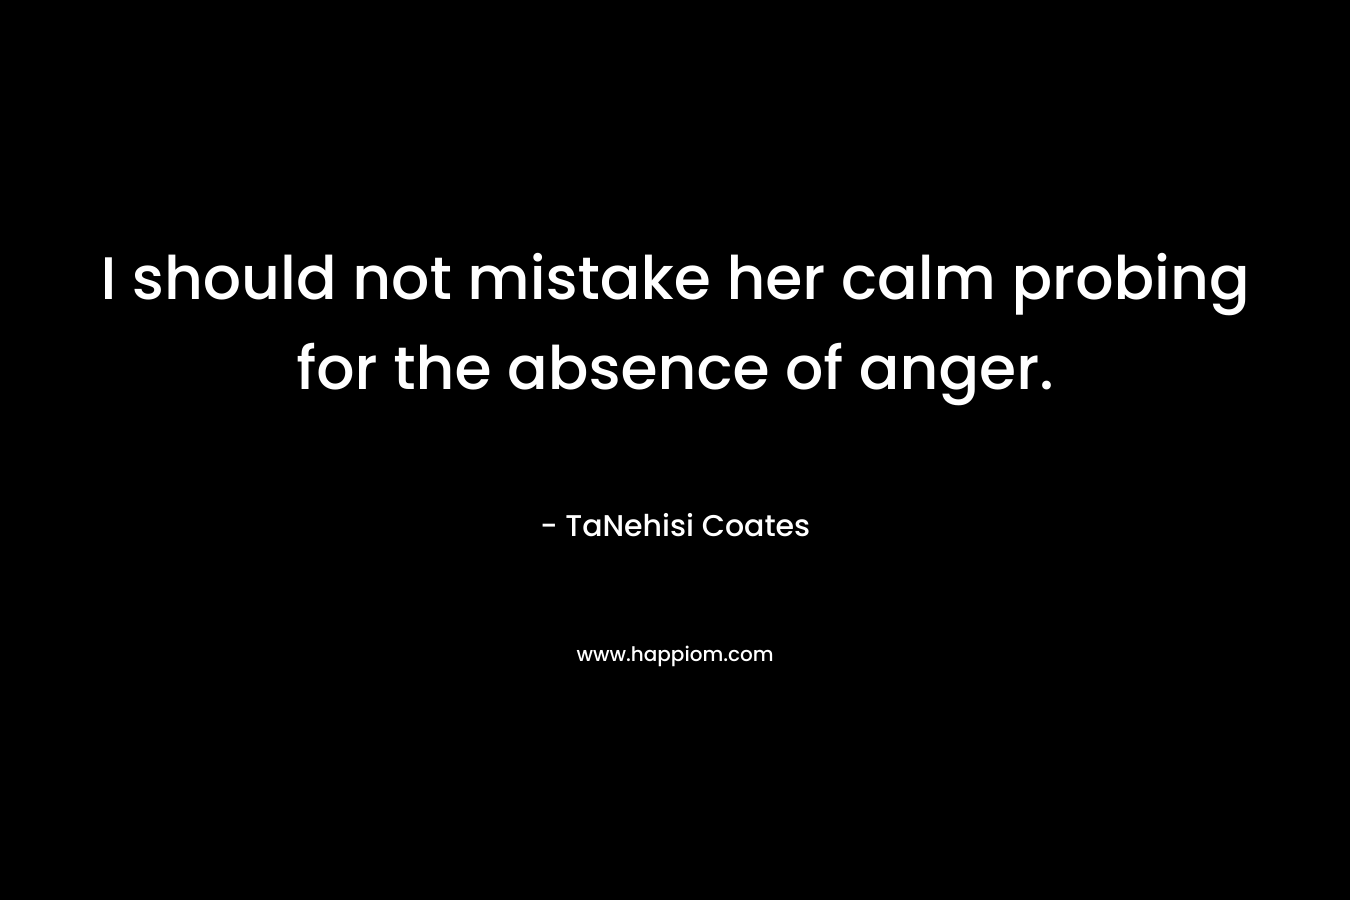 I should not mistake her calm probing for the absence of anger. – TaNehisi Coates